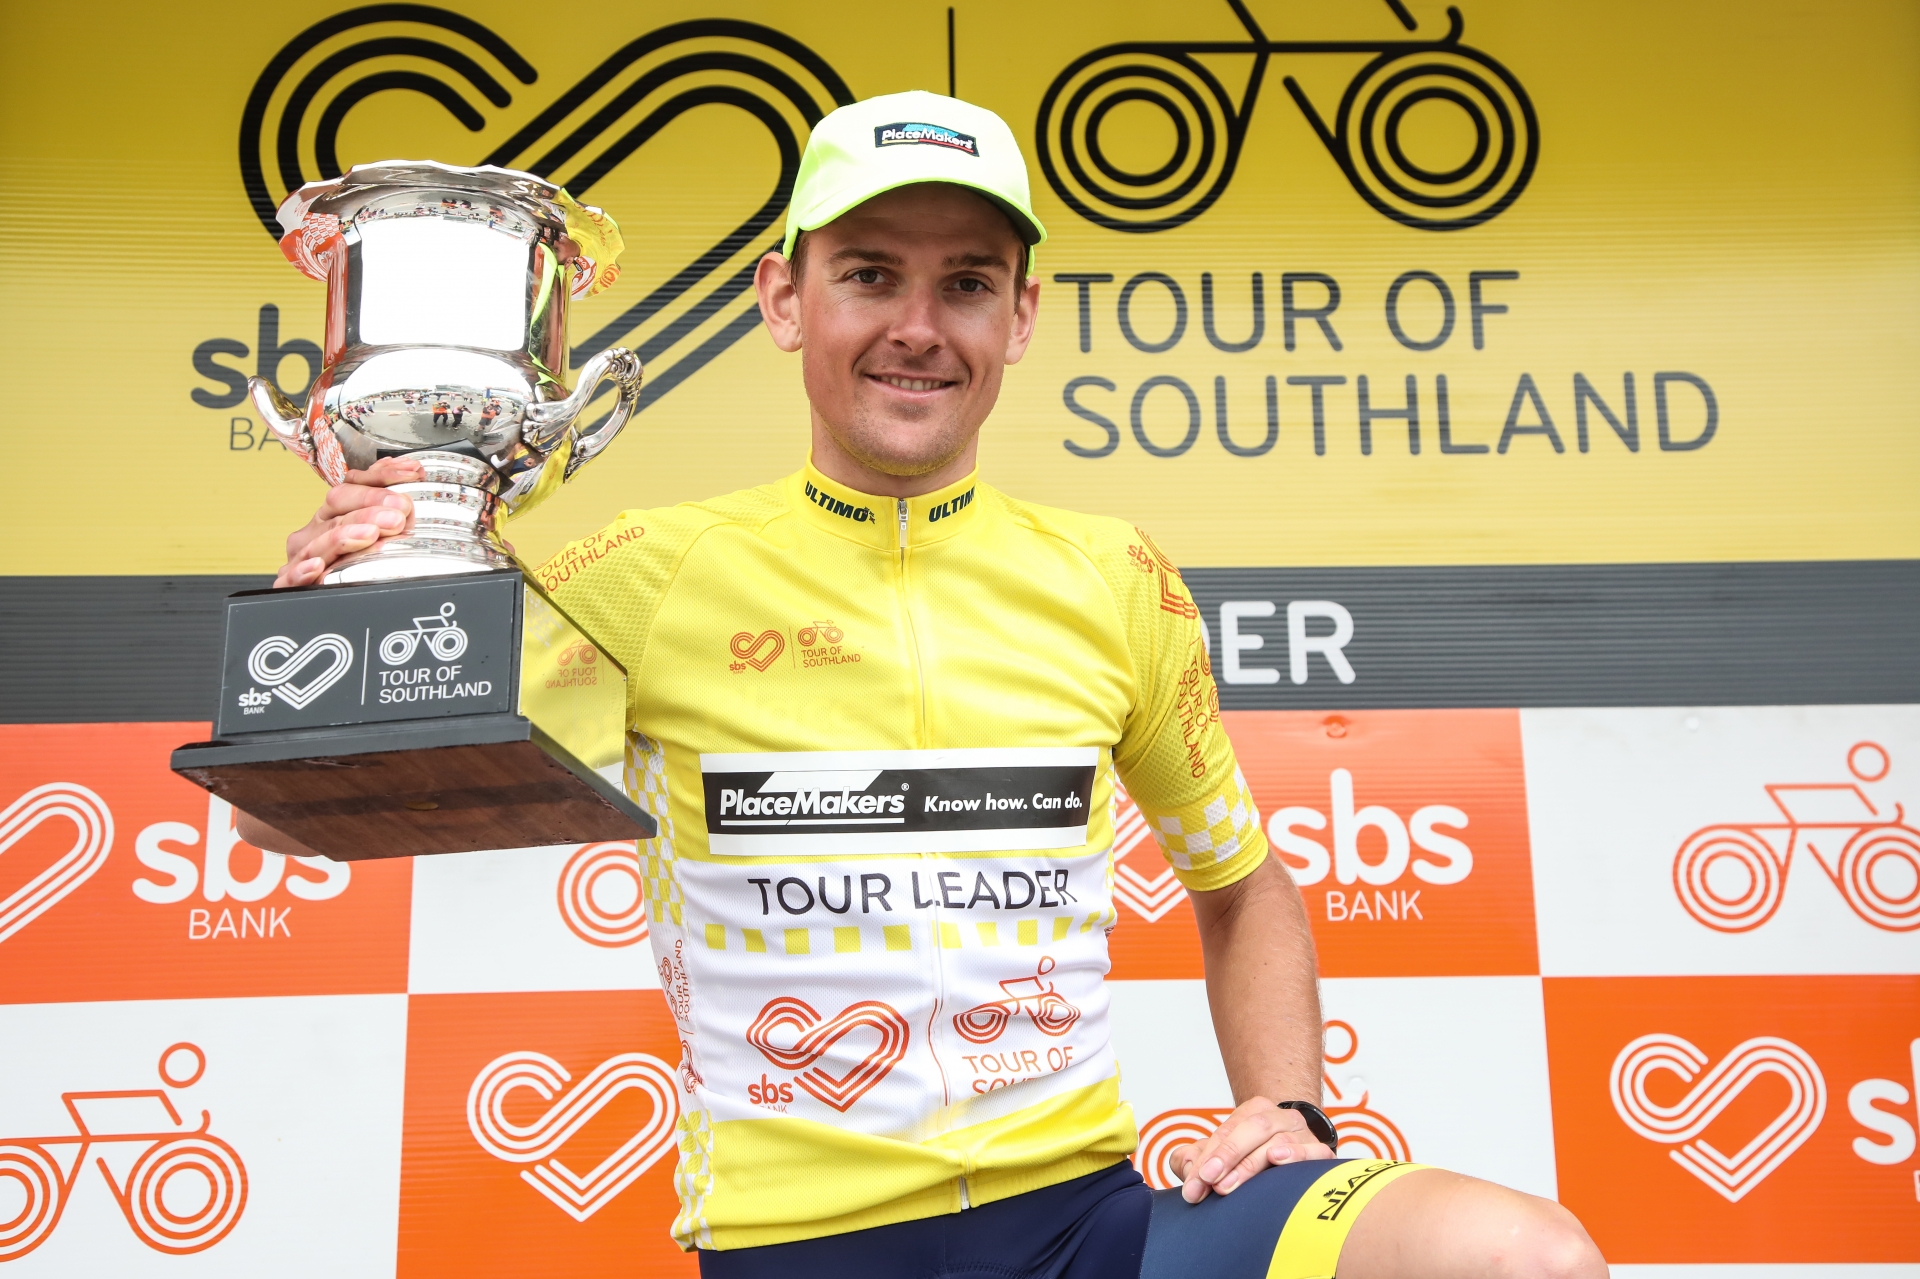 Michael Vink (Placemakers) won the SBS Bank Tour of Southland title in 2019. Photo credit James Jubb